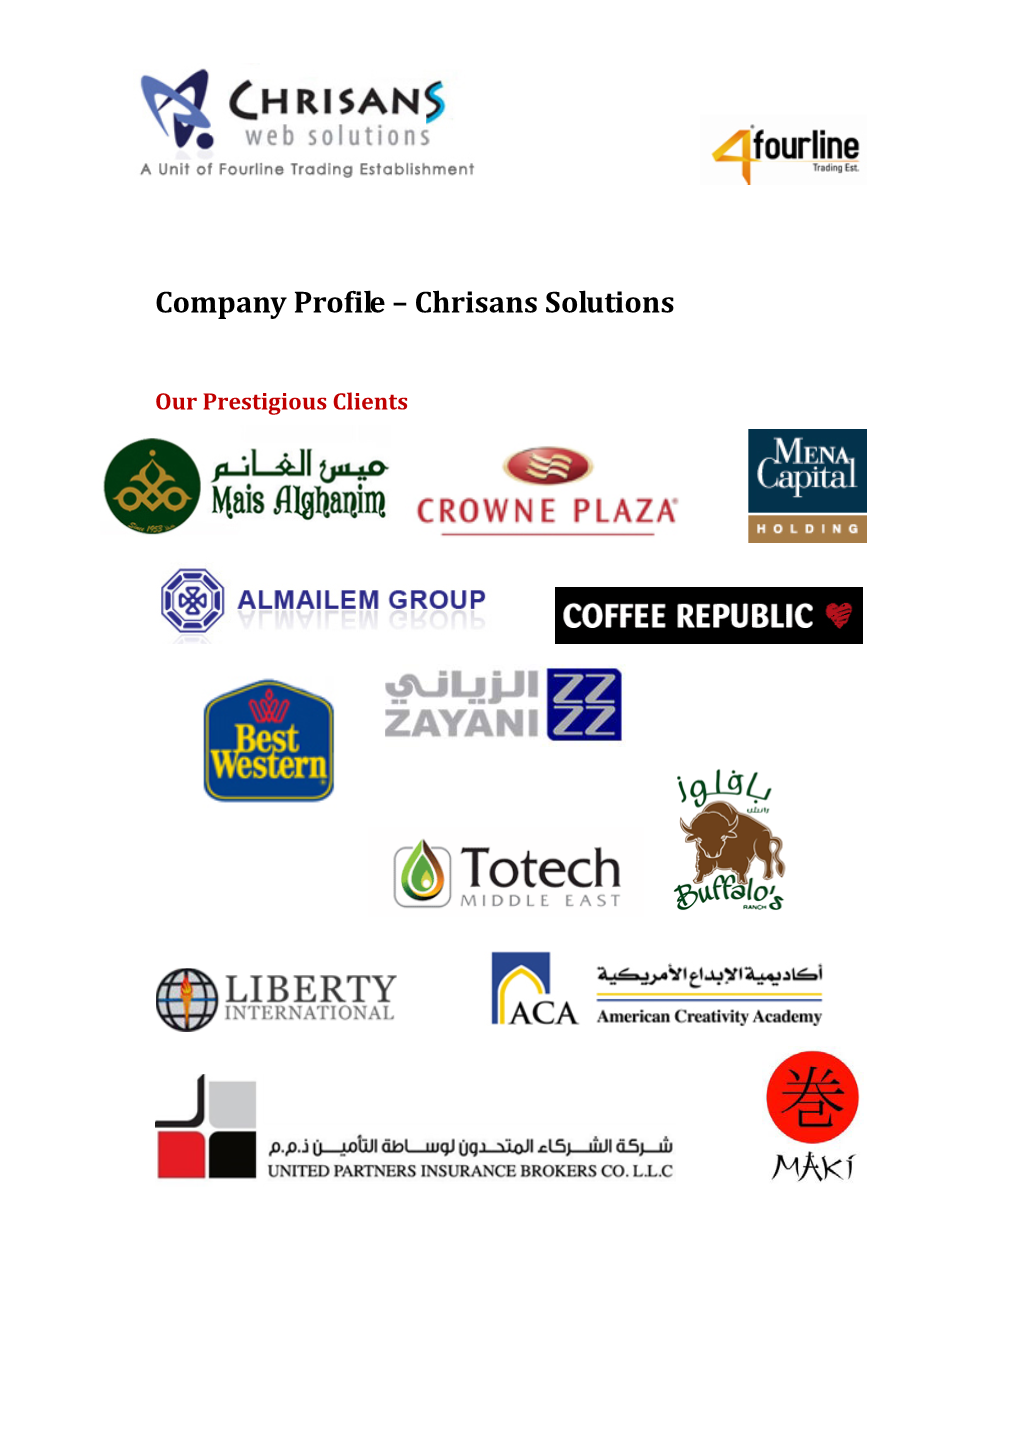 Company Profile – Chrisans Solutions